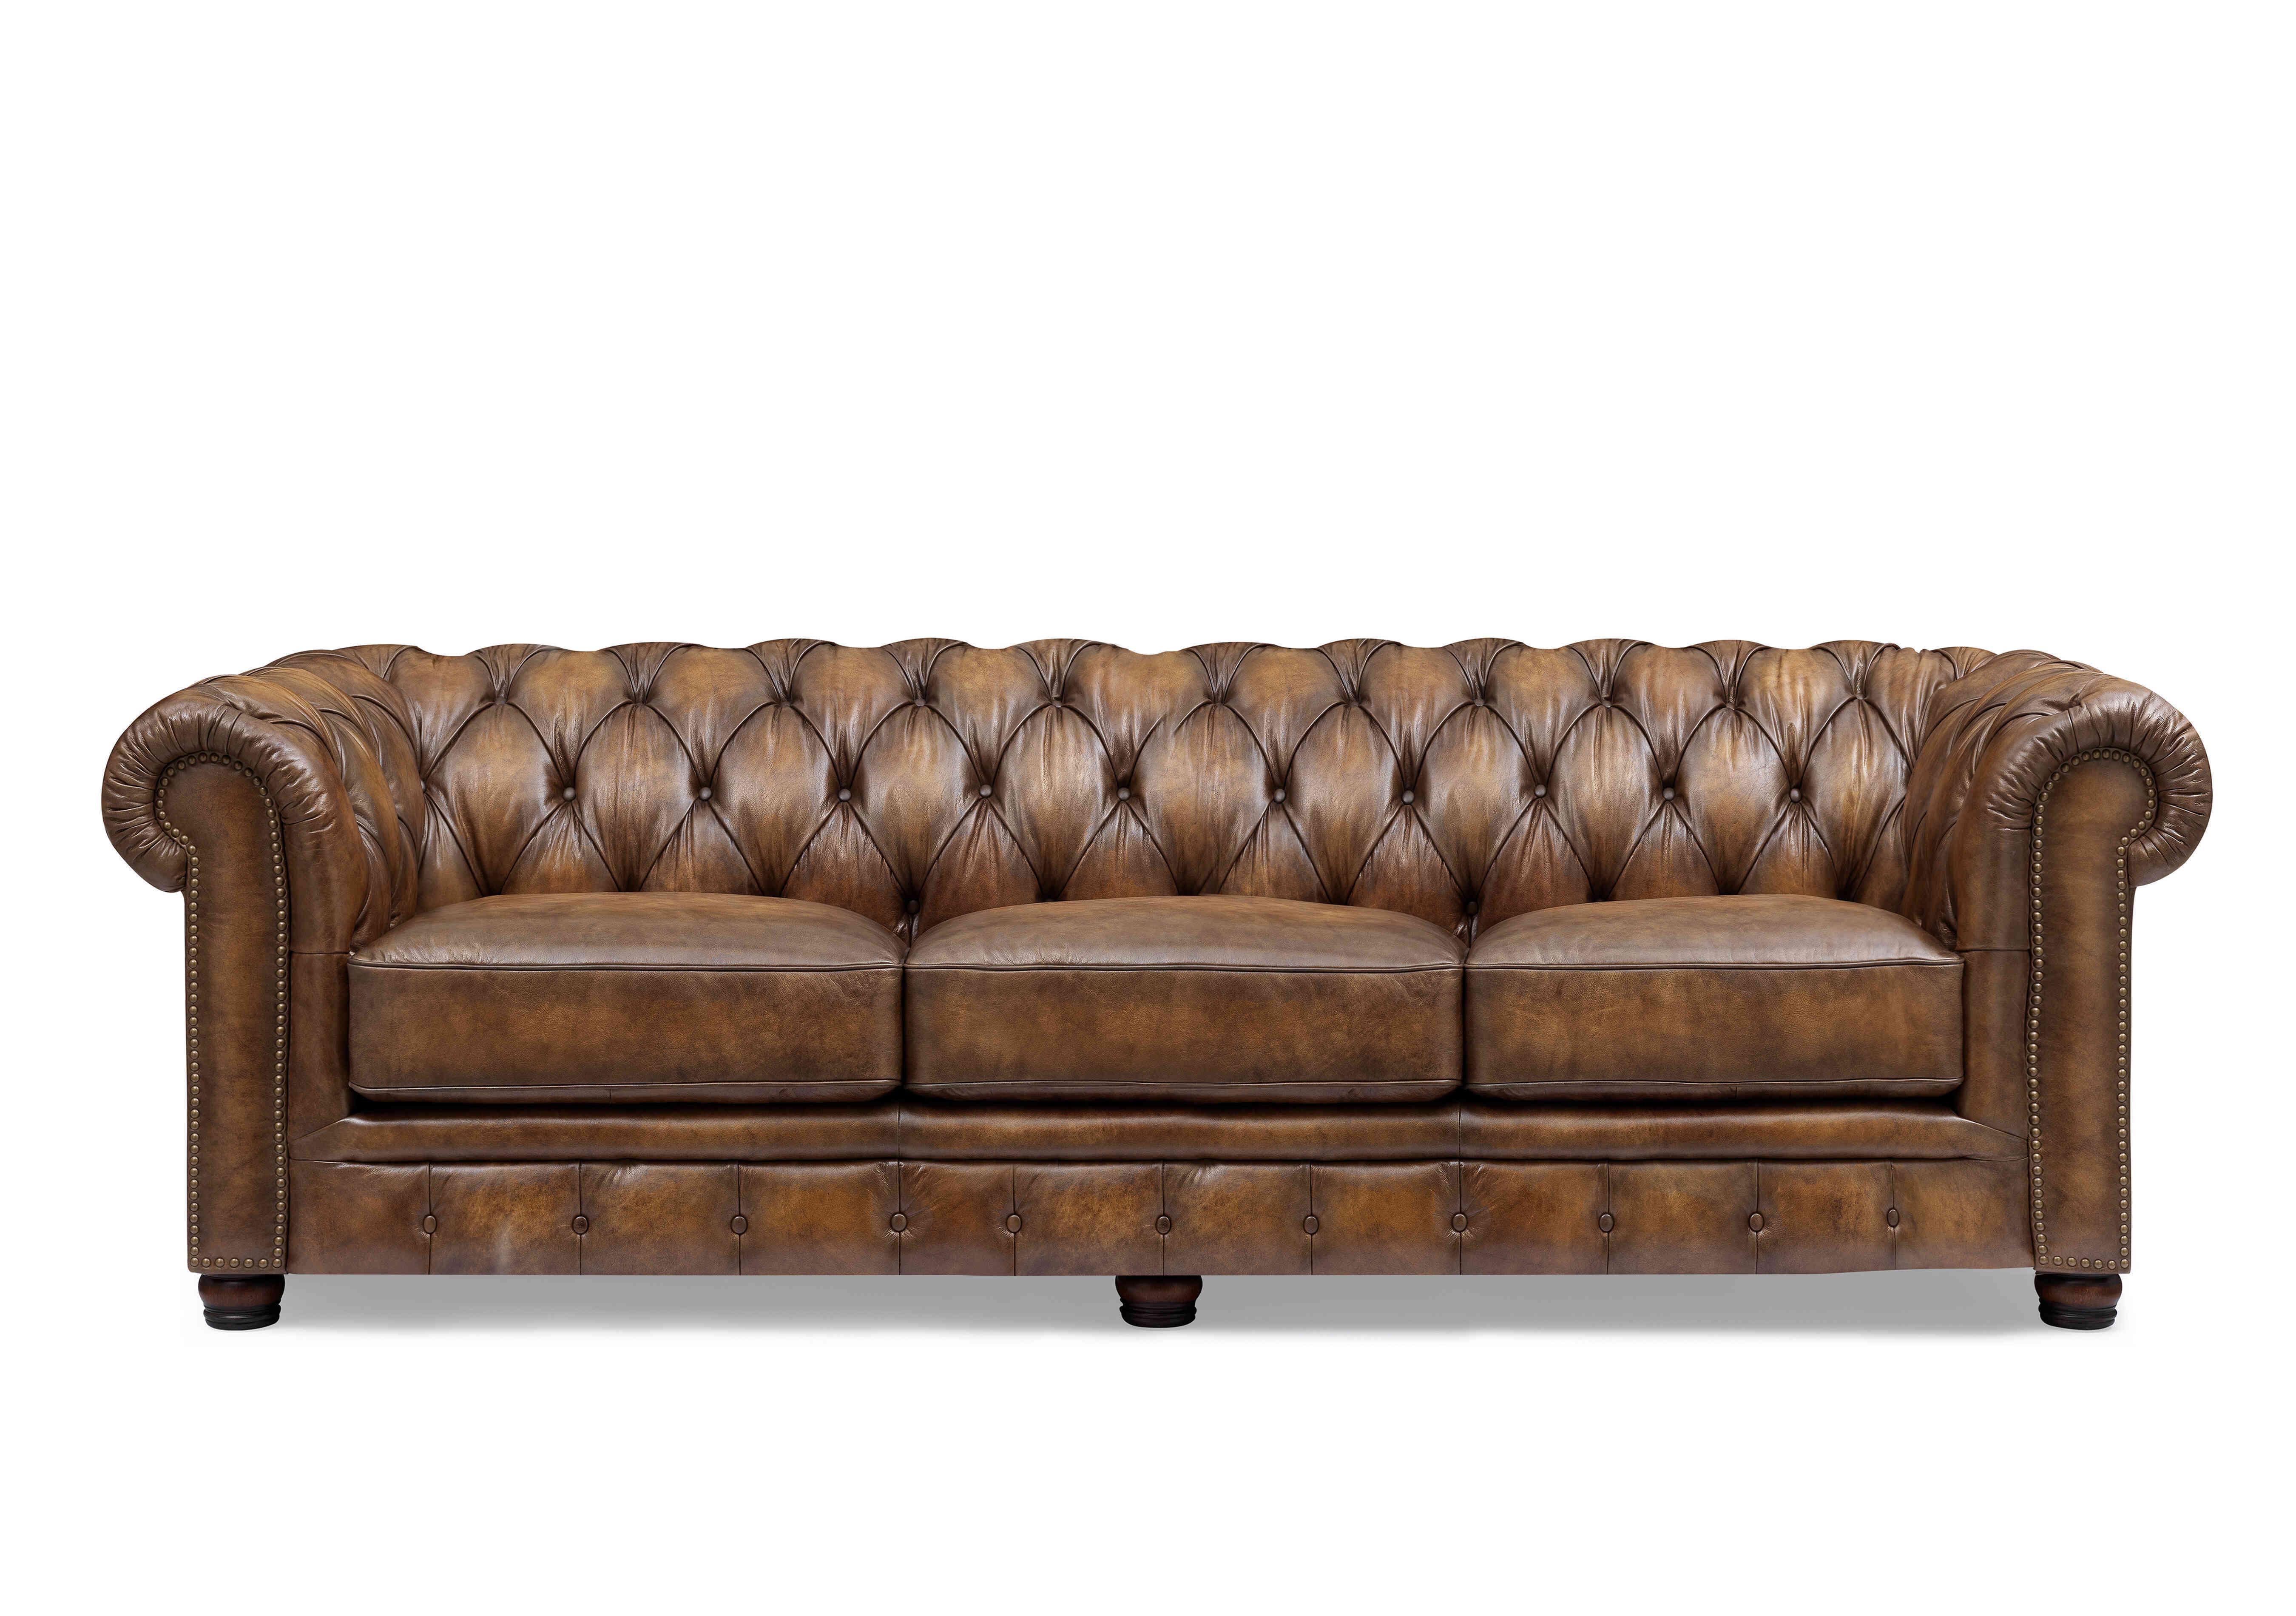 Shackleton 4 Seater Leather Chesterfield Sofa with USB-C in X3y1-1981ls Saddle on Furniture Village